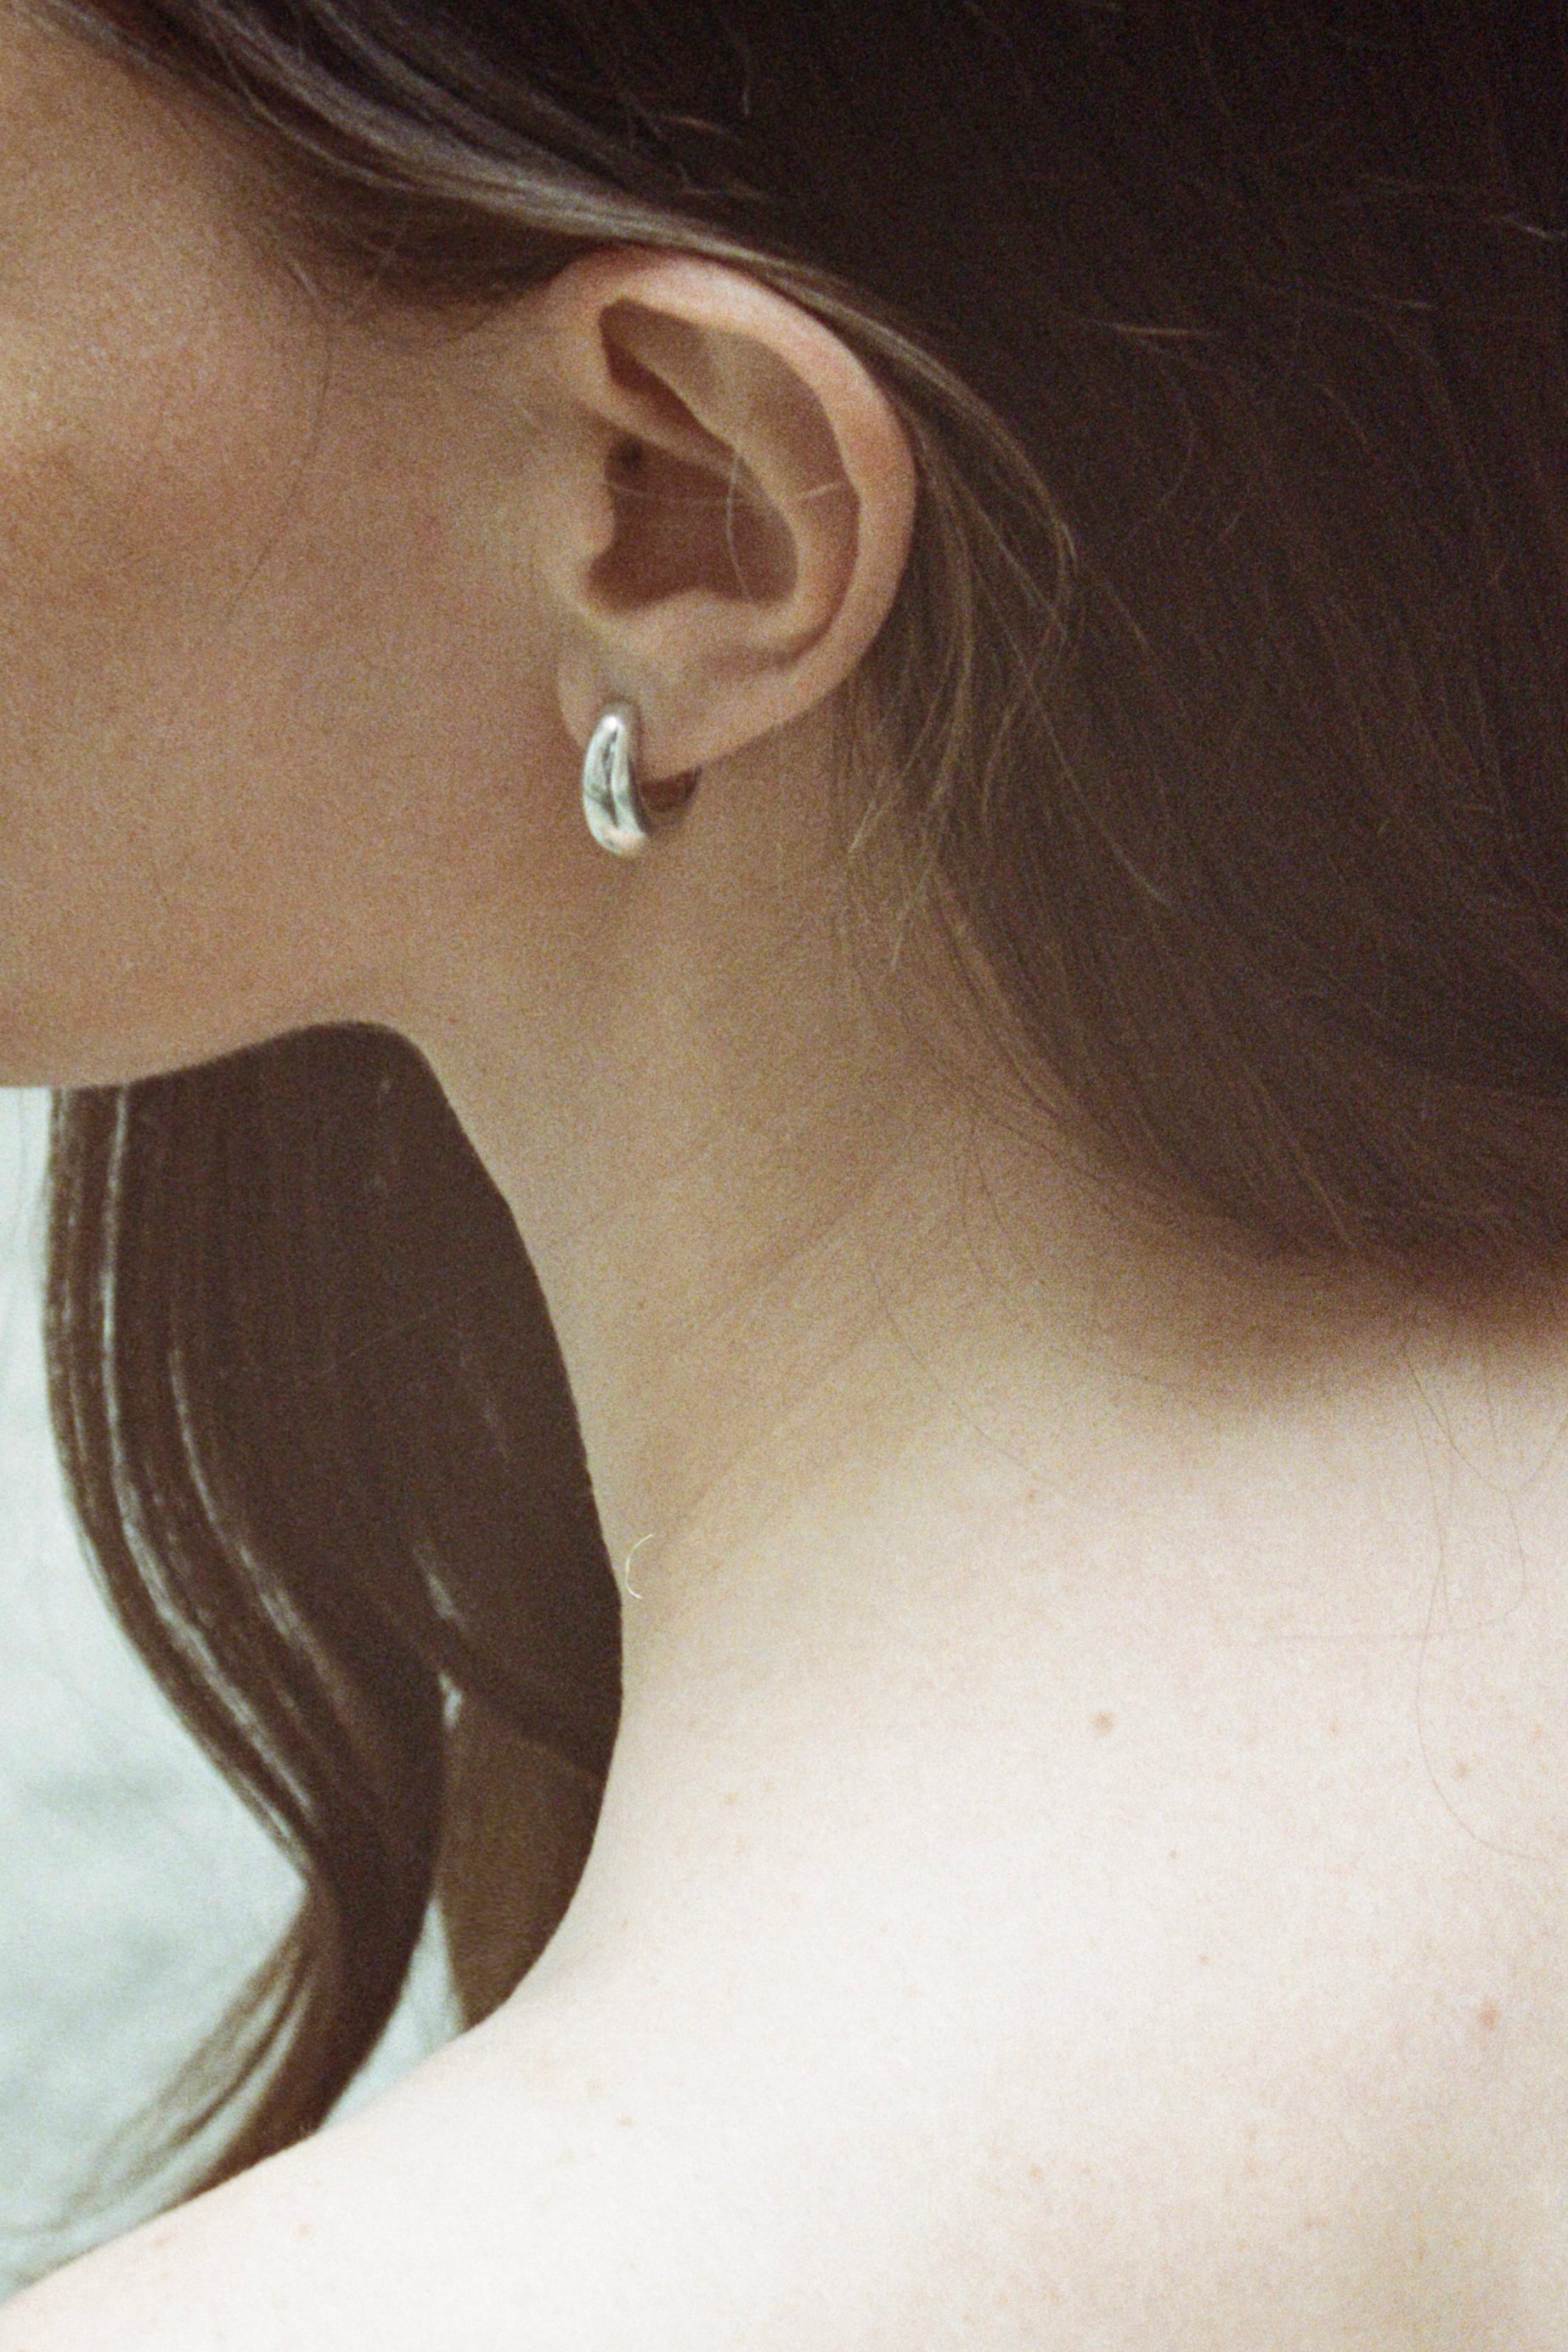 Image of Edition 4. Piece13. Earrings 